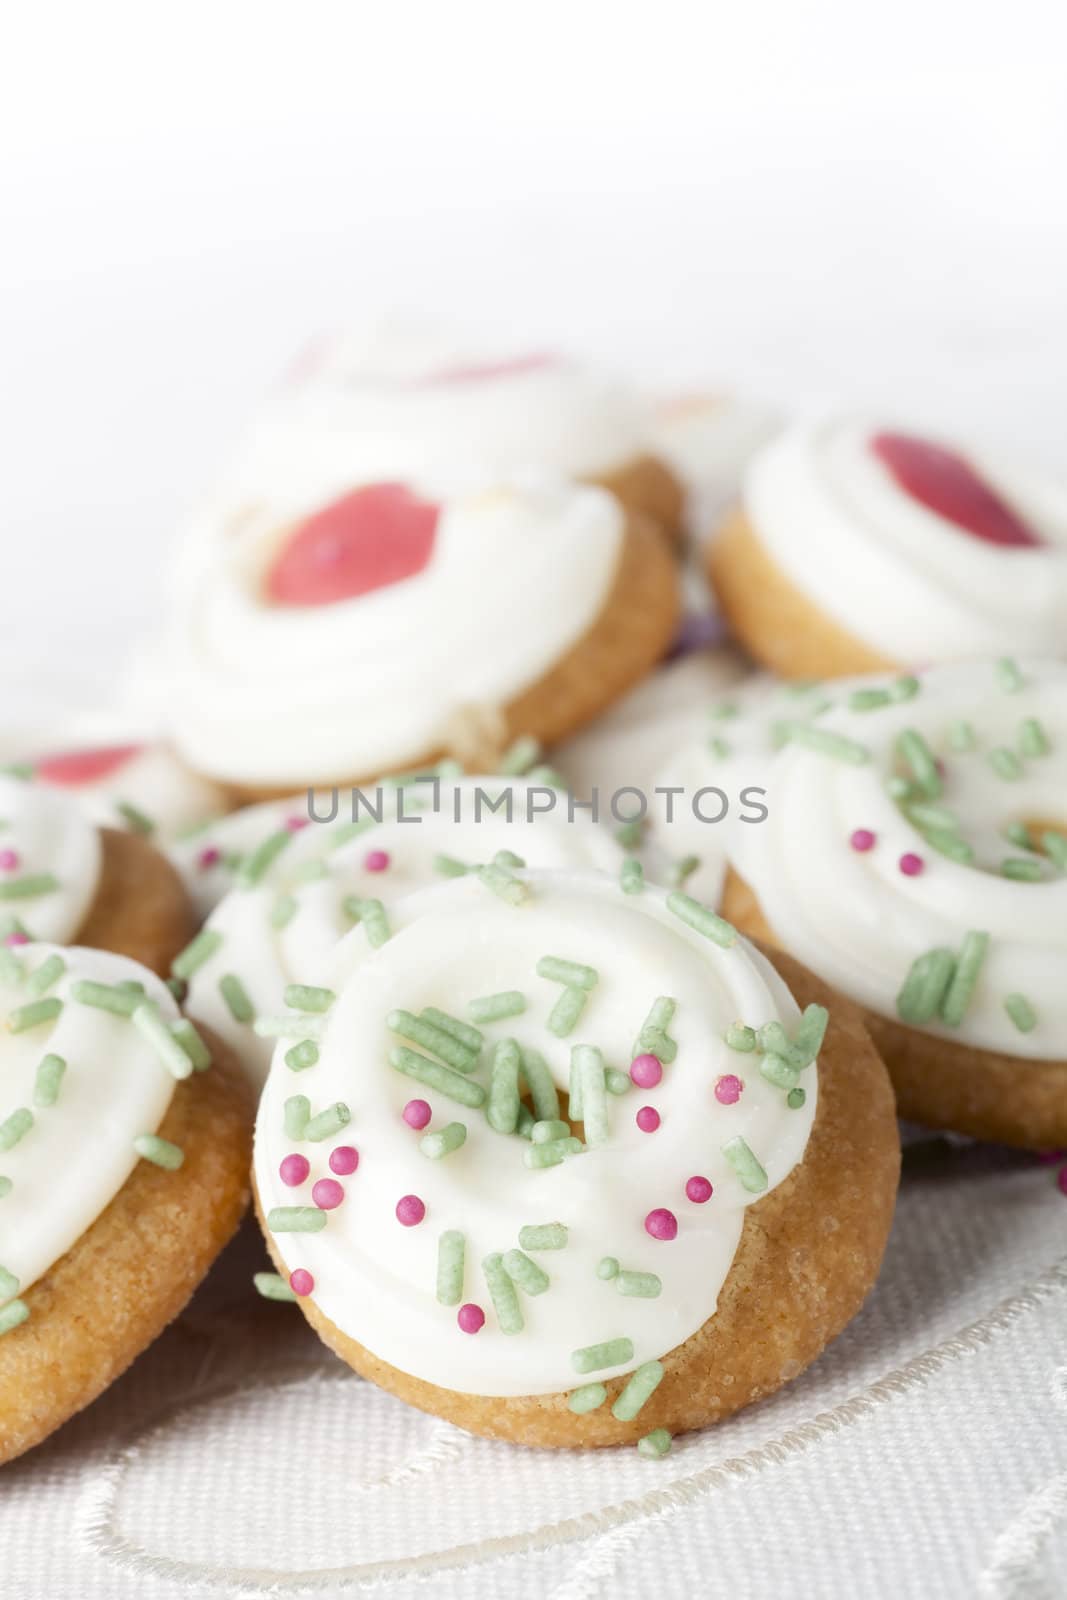 Festive cookies with frosting and decorations.